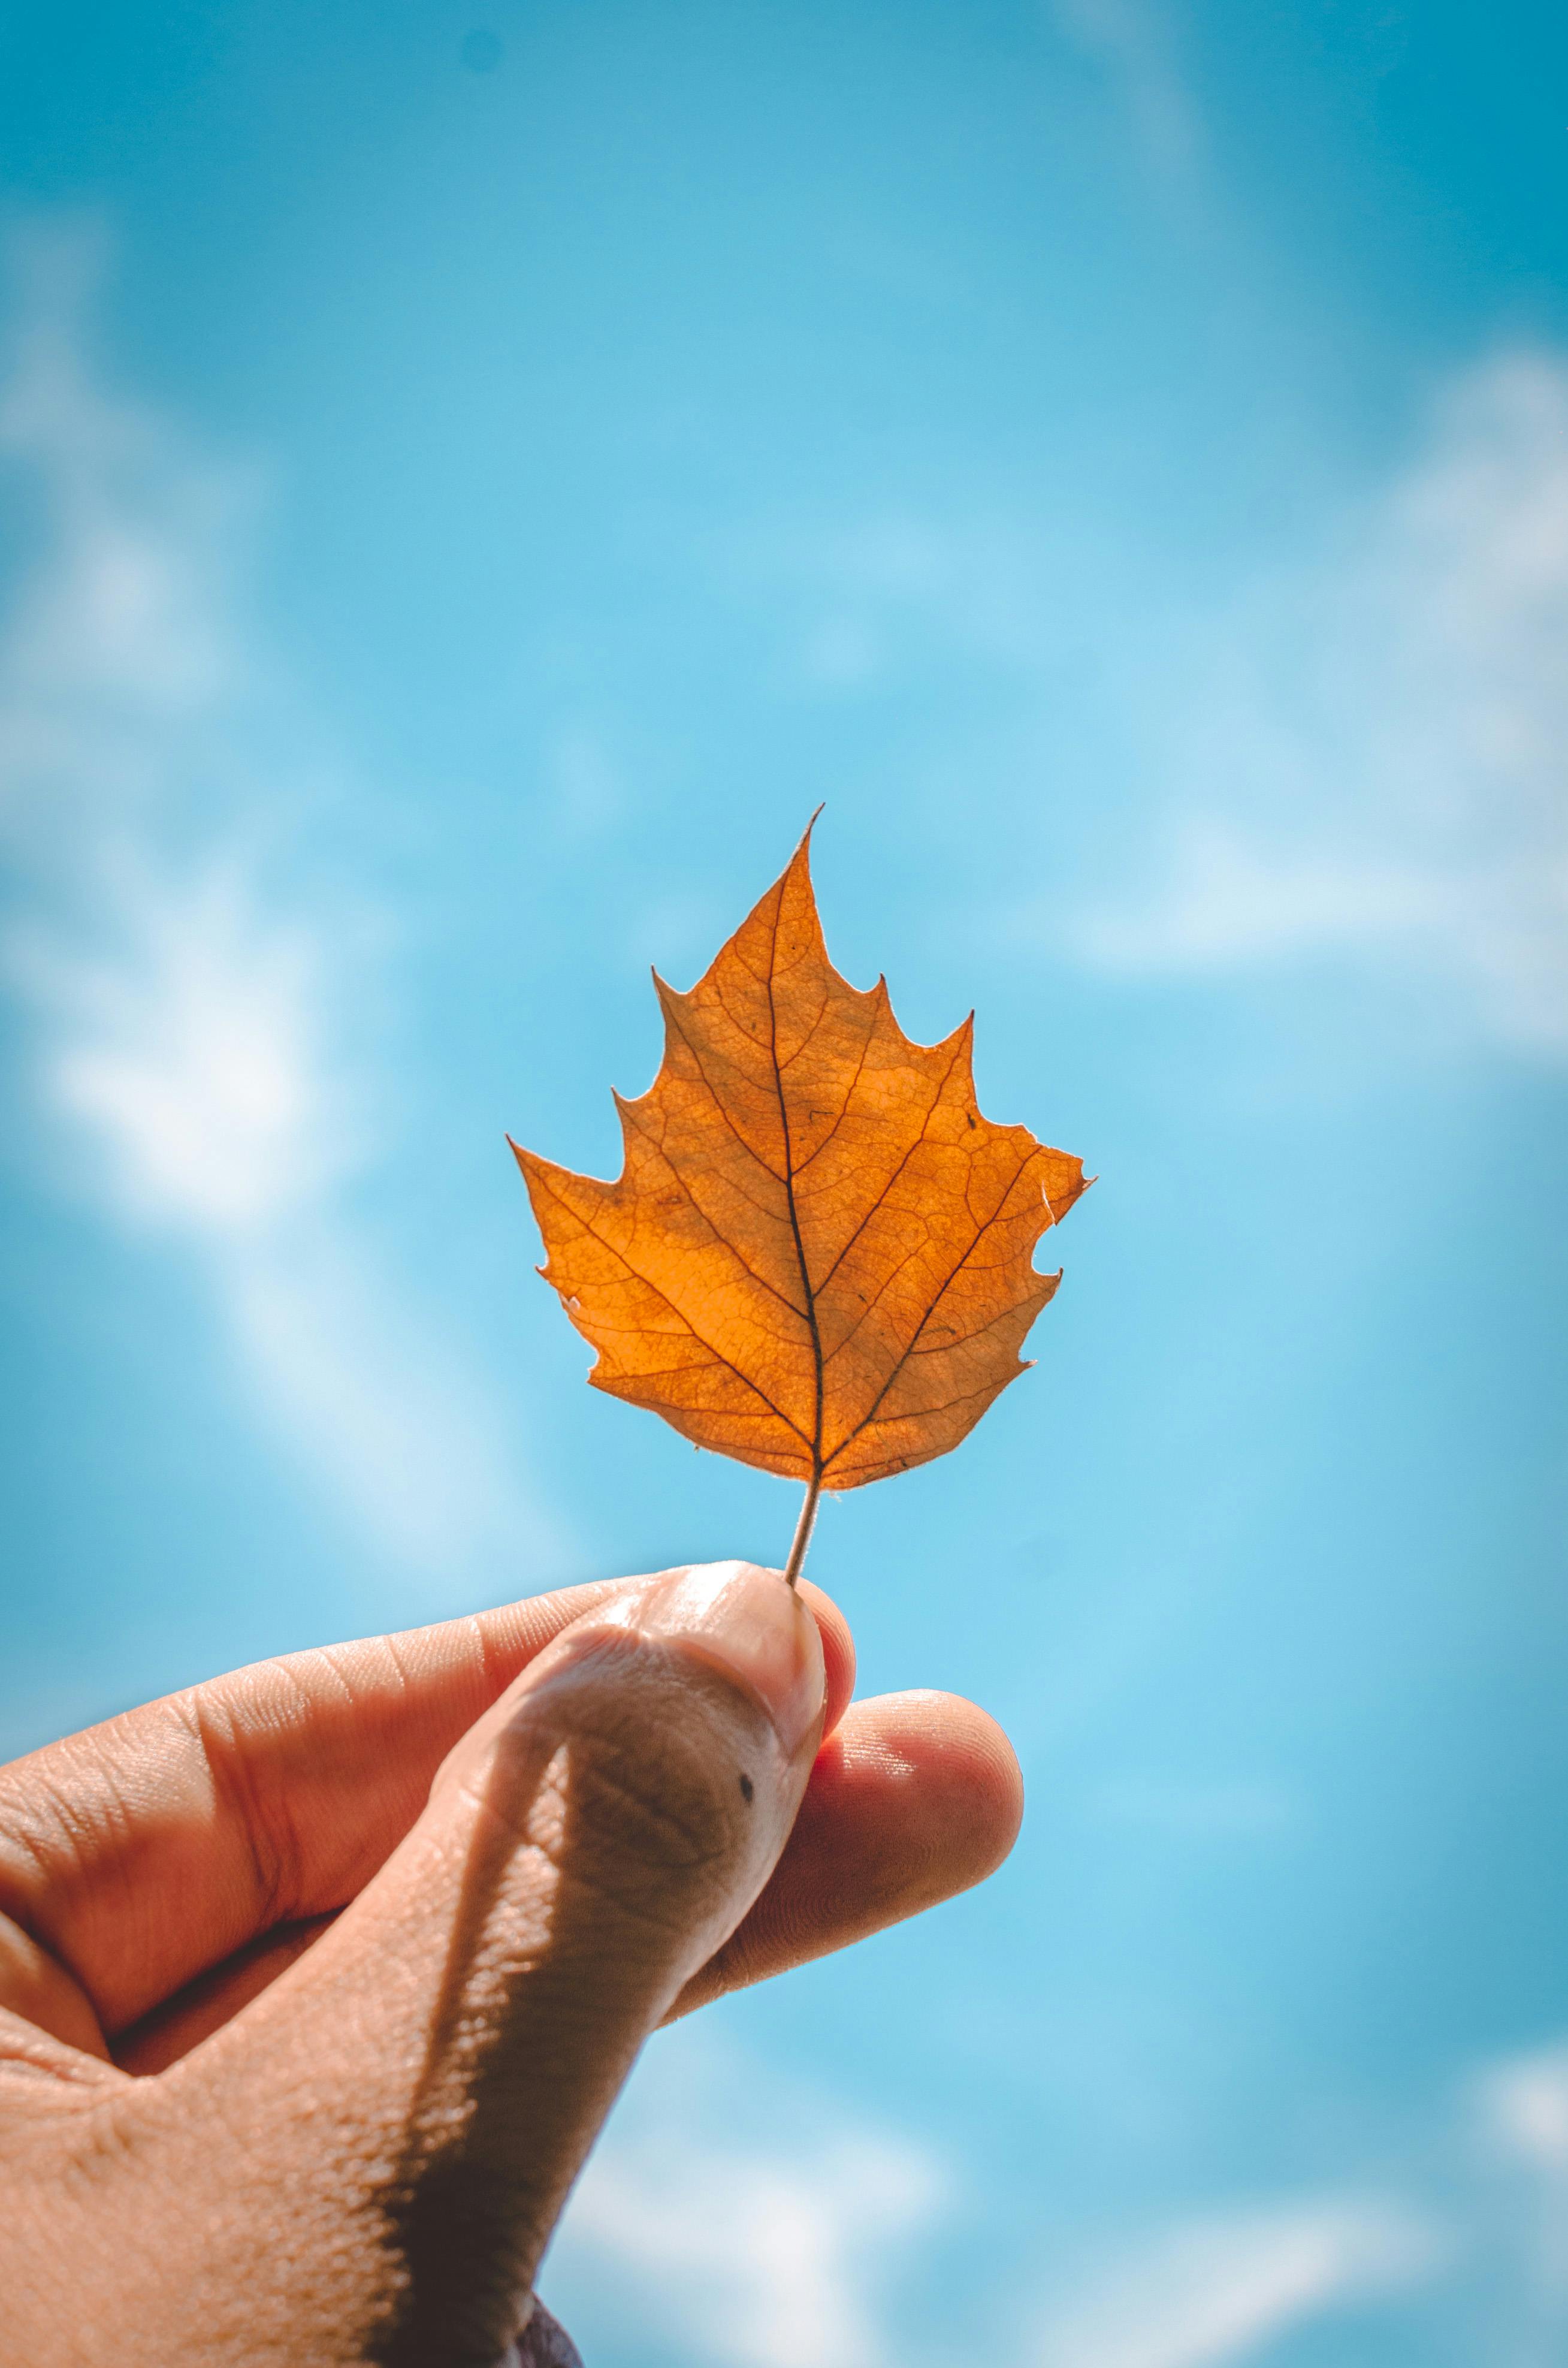 Autumn Photos, Download The BEST Free Autumn Stock Photos & HD Images